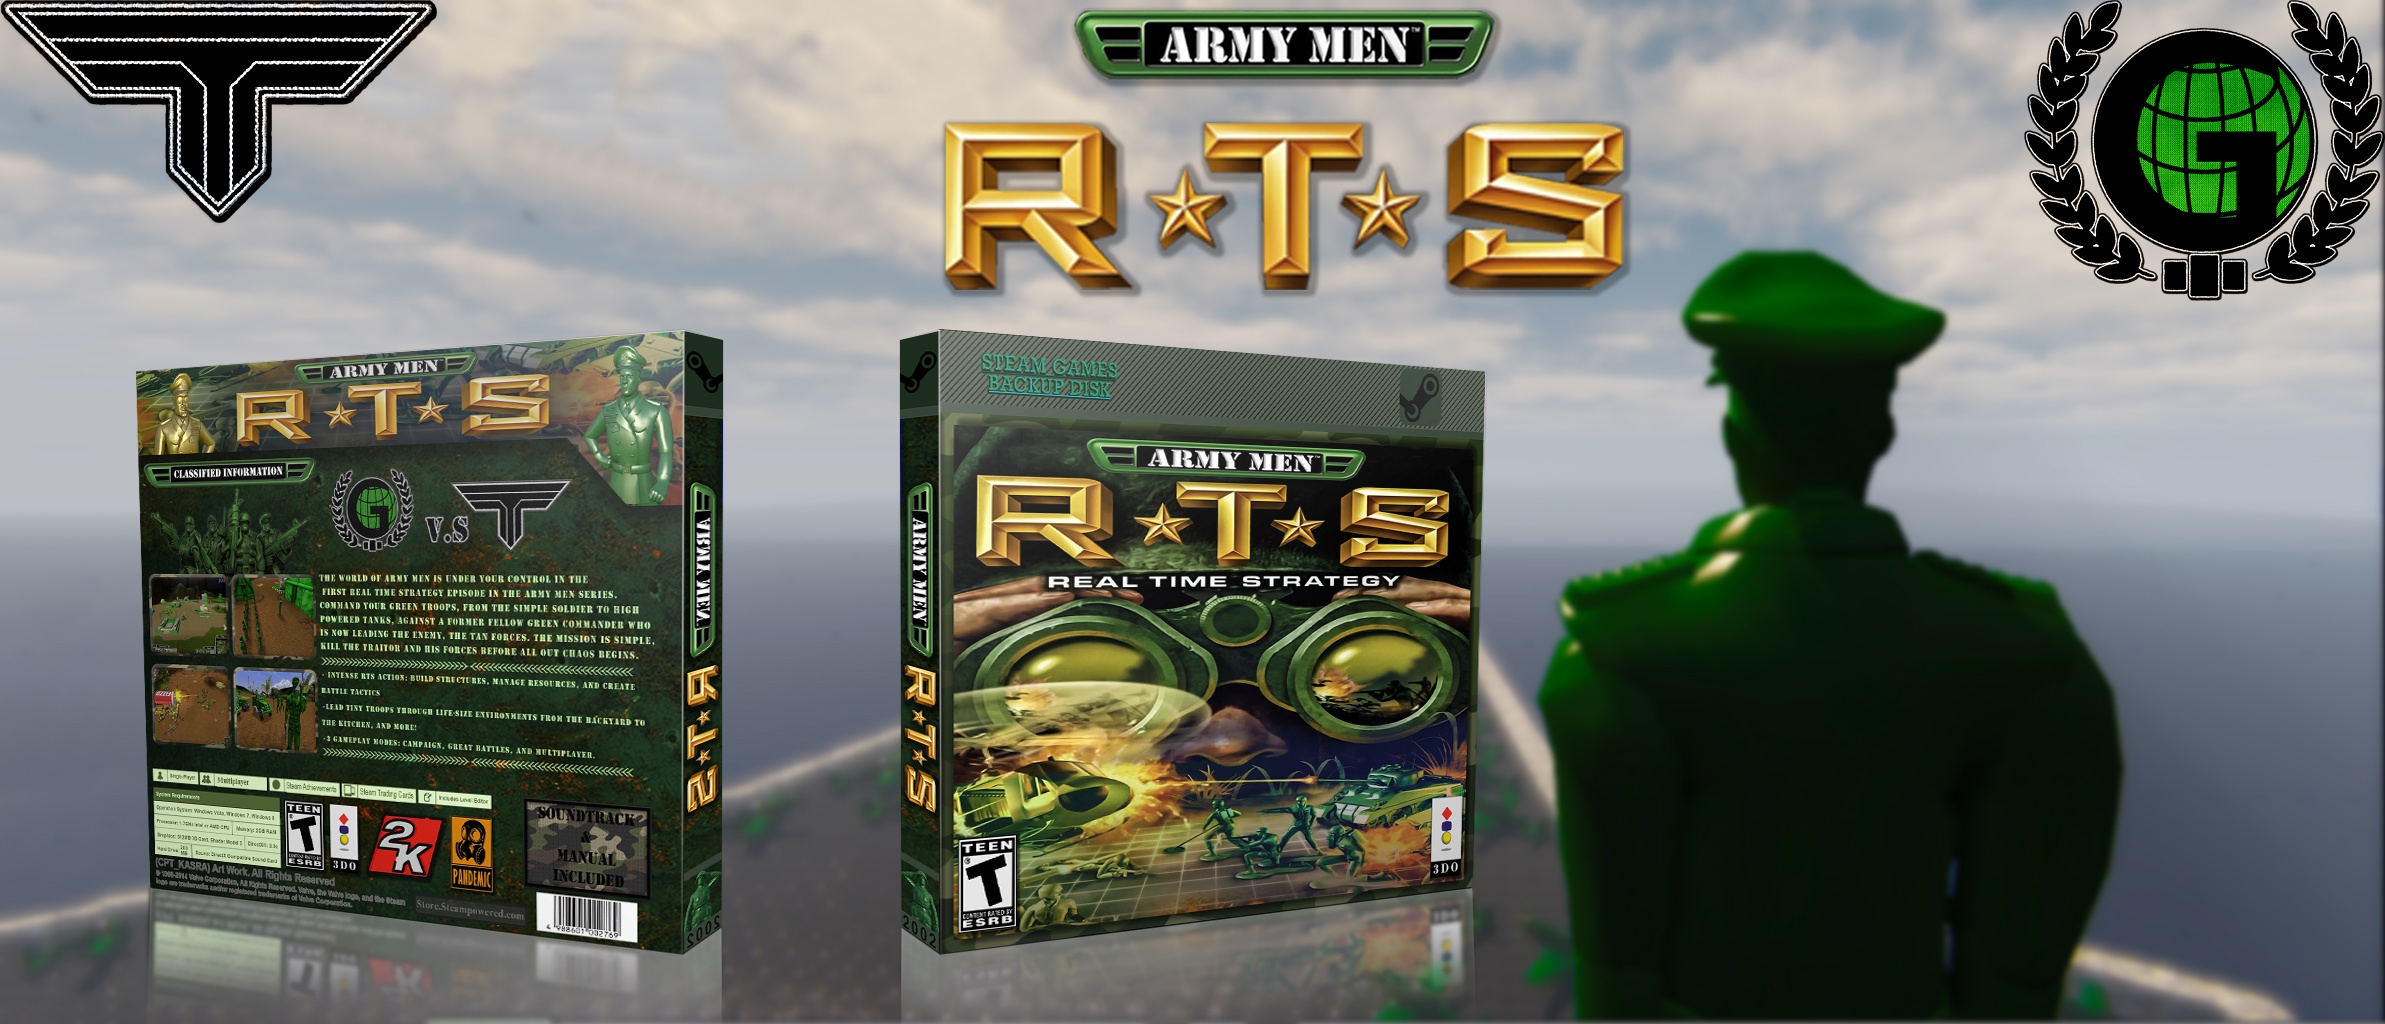 Army Men: RTS box cover